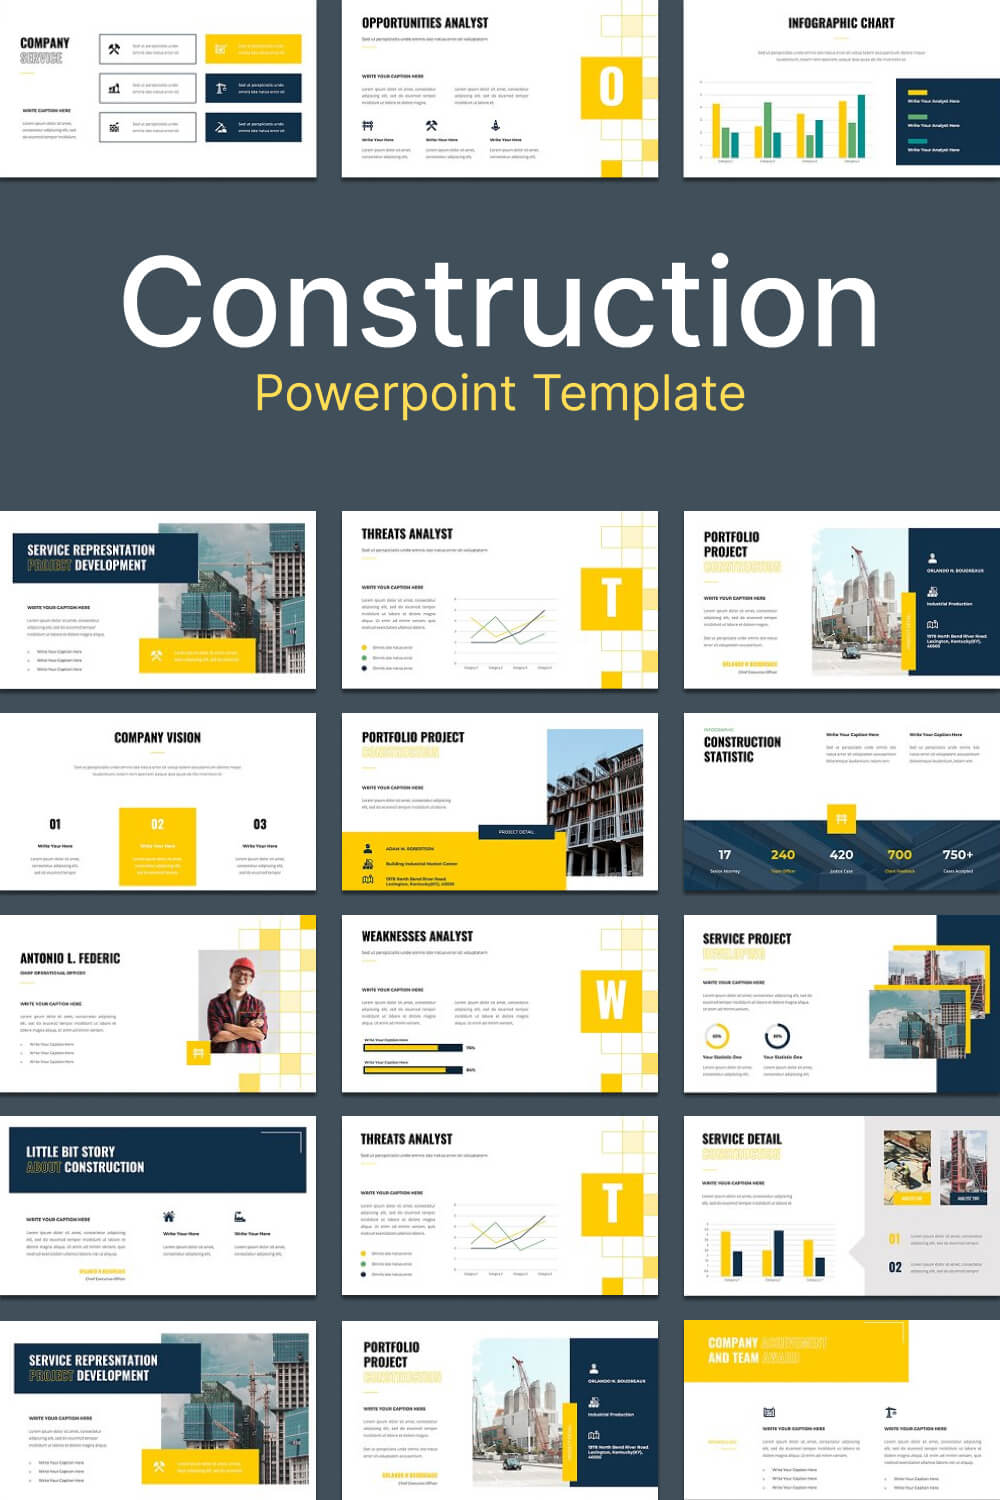 18 Gray Building Powerpoint Templates for Pinterest.